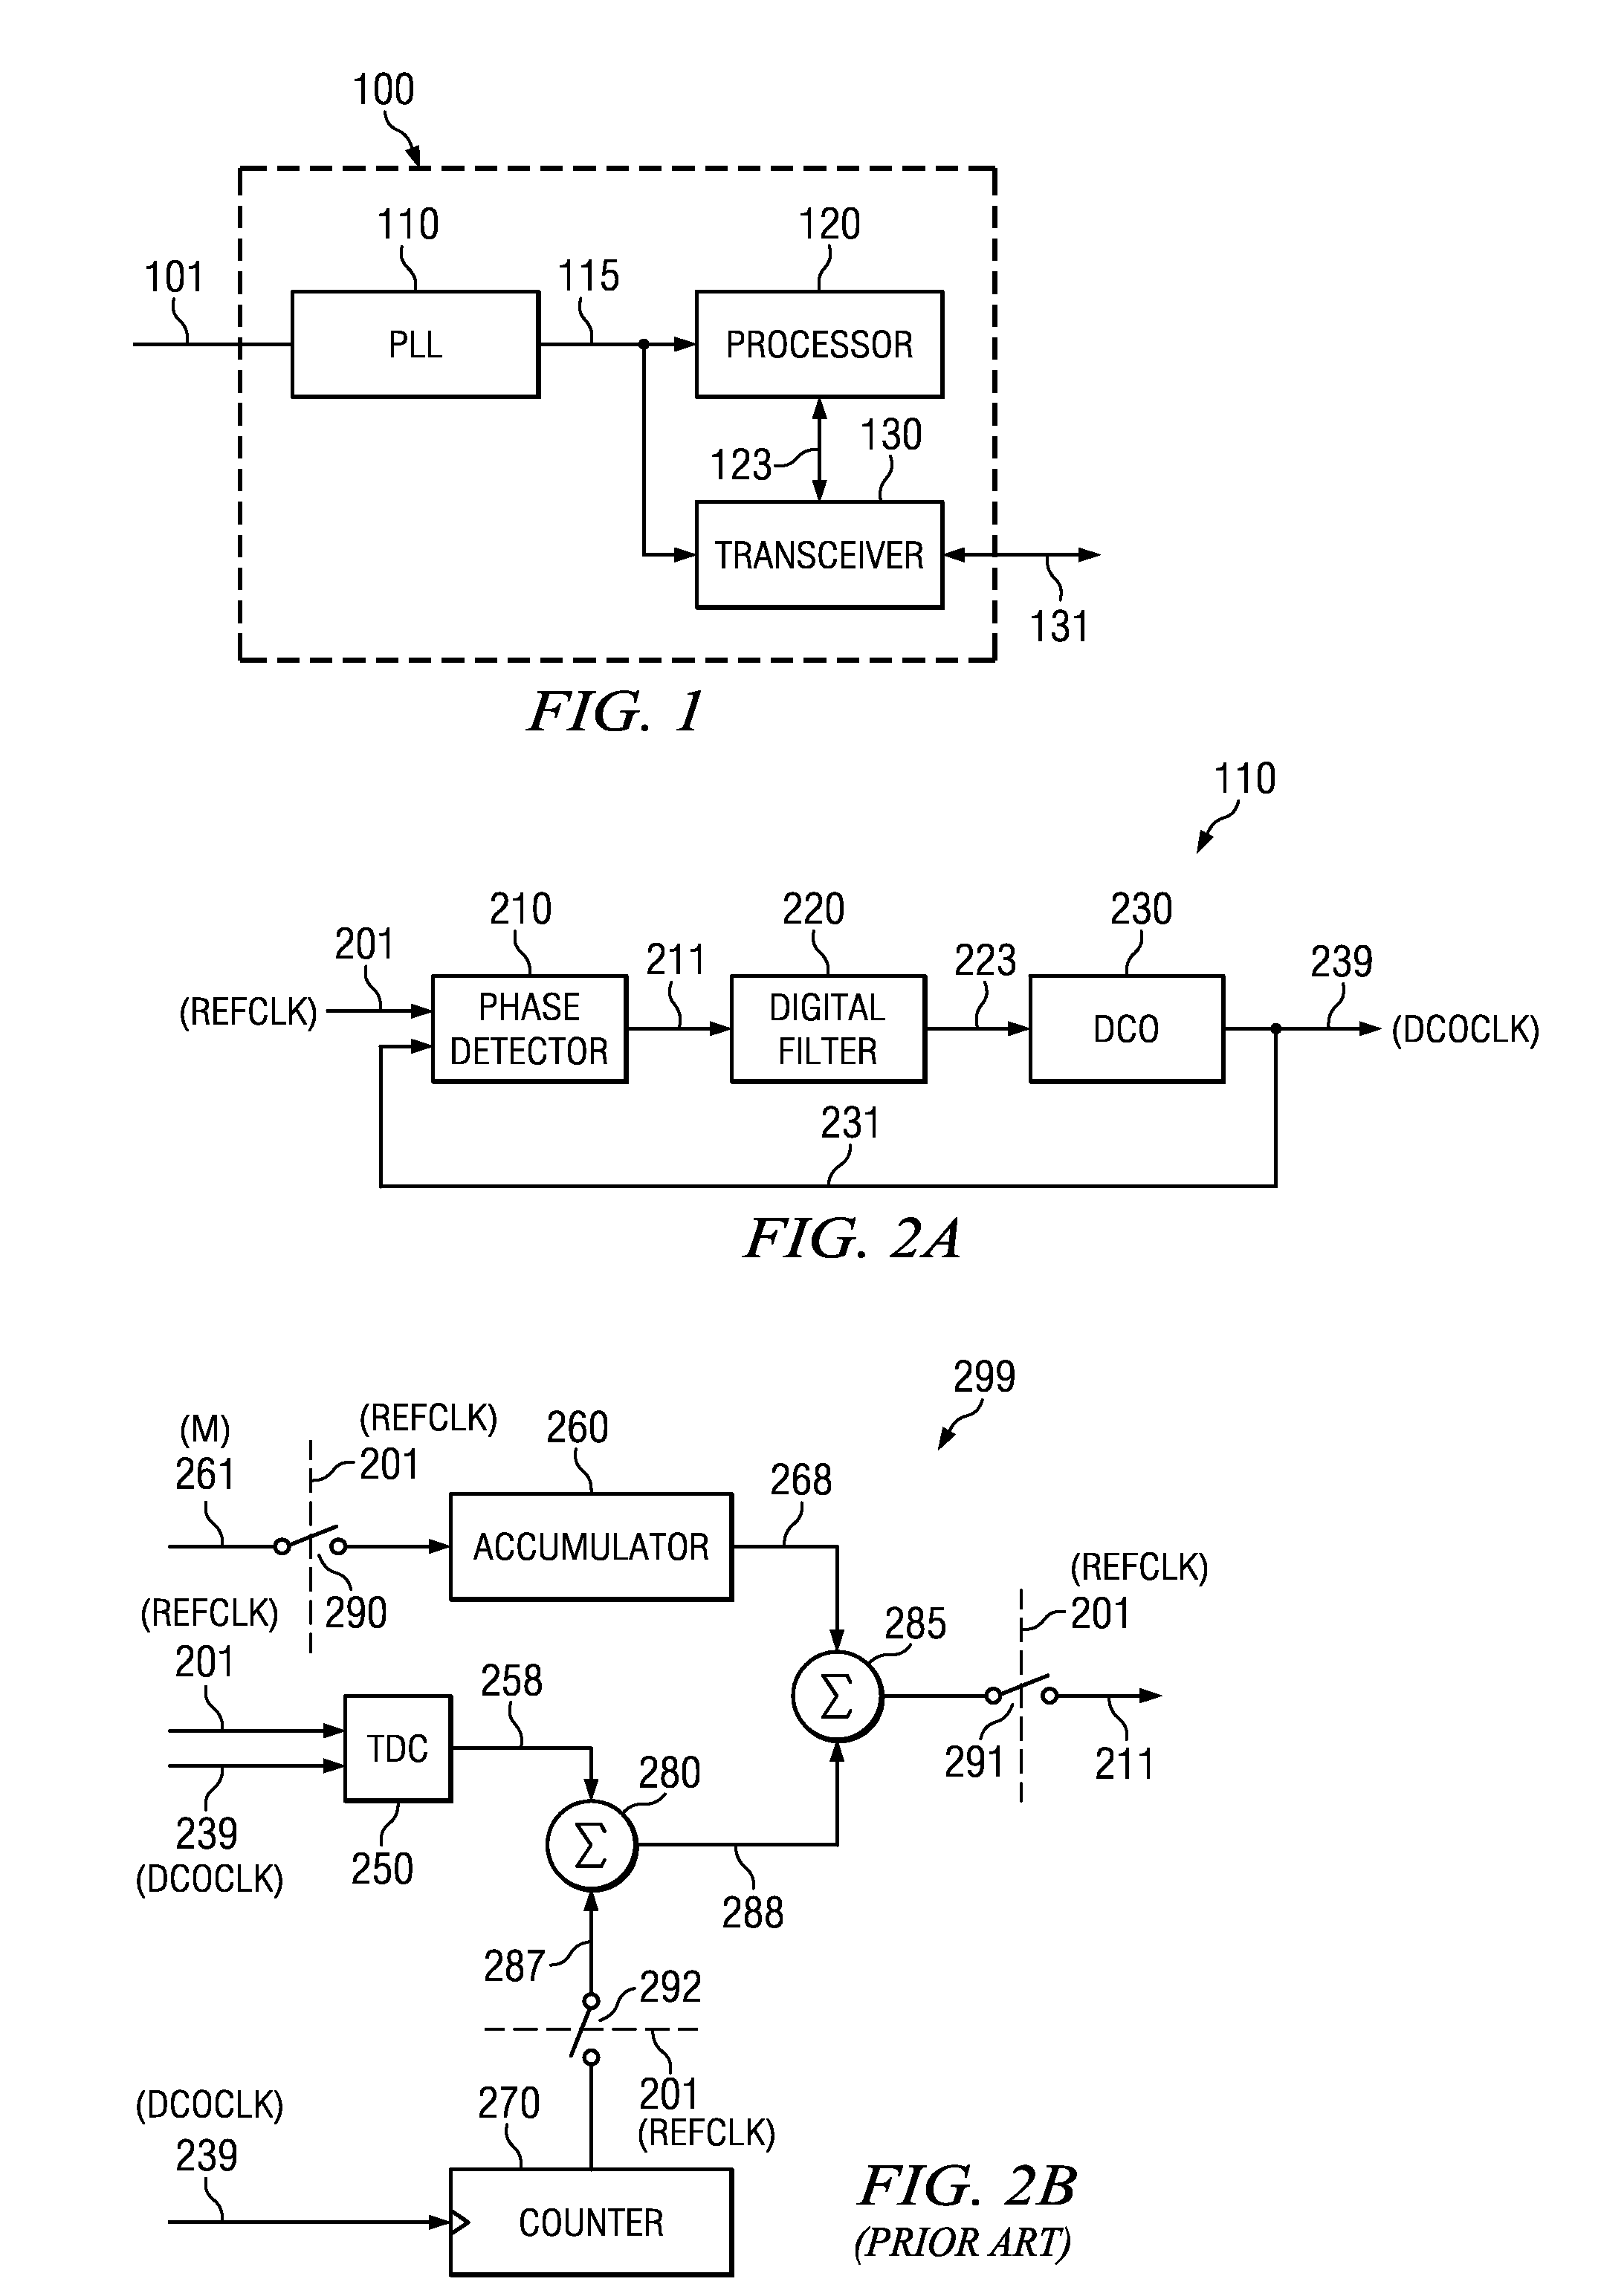 Reference clock re-timing scheme in electronic circuits